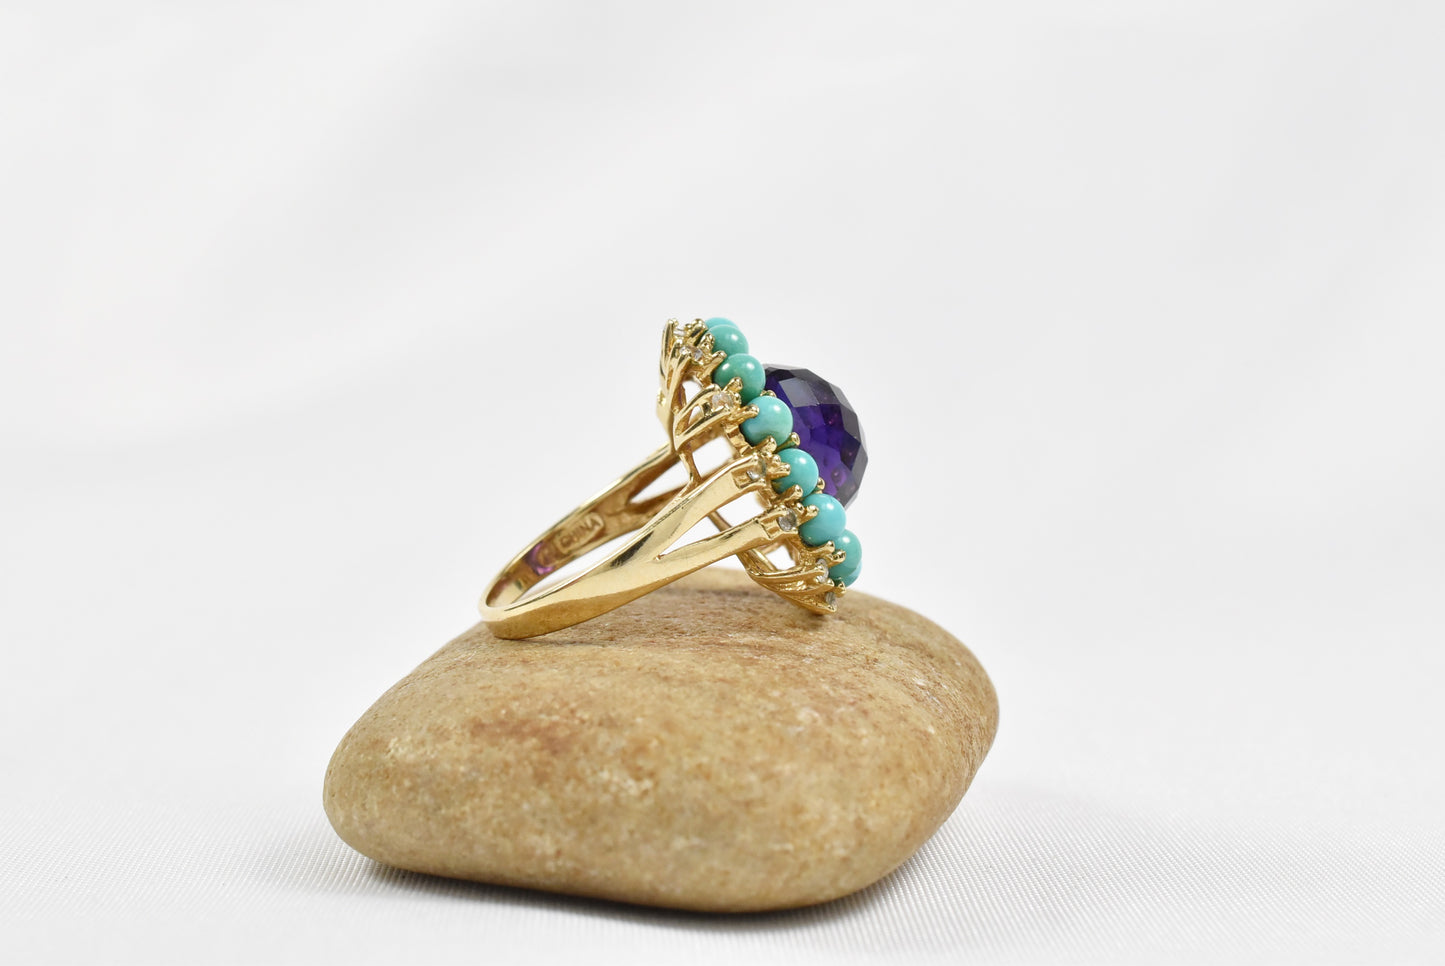 10k Yellow Gold Blue Coral & Amethyst Ring, Size 8.25 - 7.7g